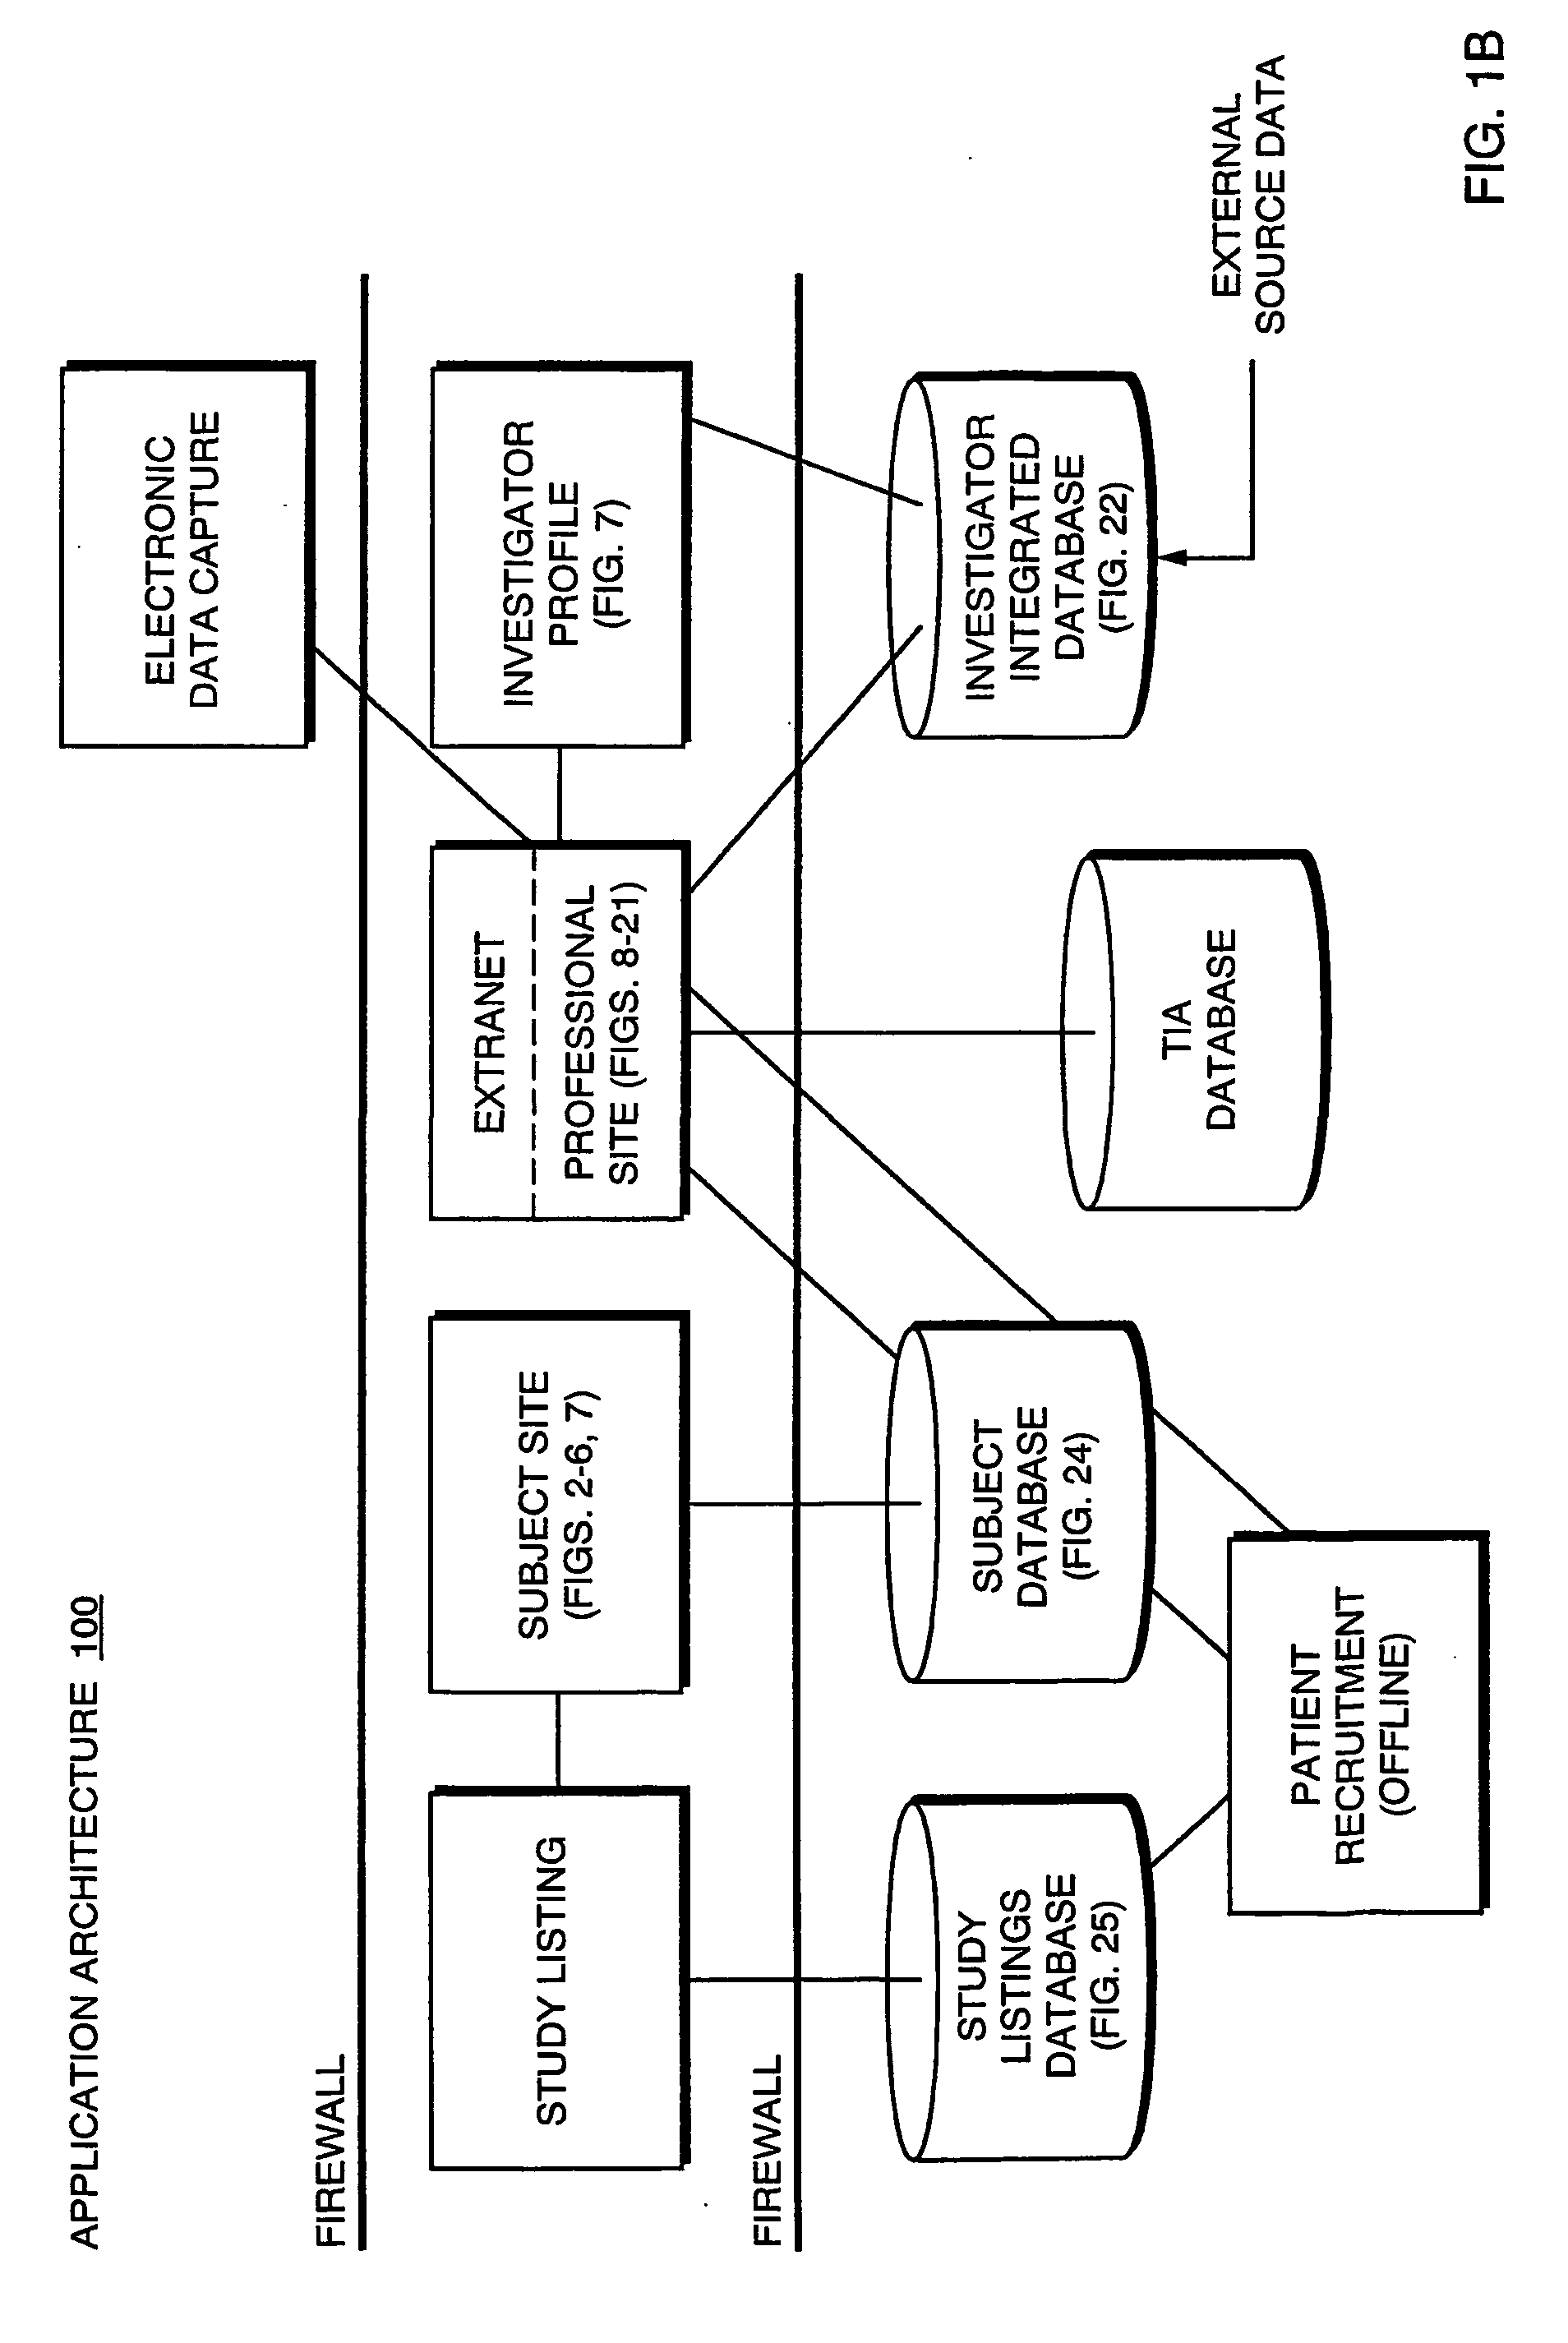 Systems and methods for selecting and recruiting investigators and subjects for clinical studies